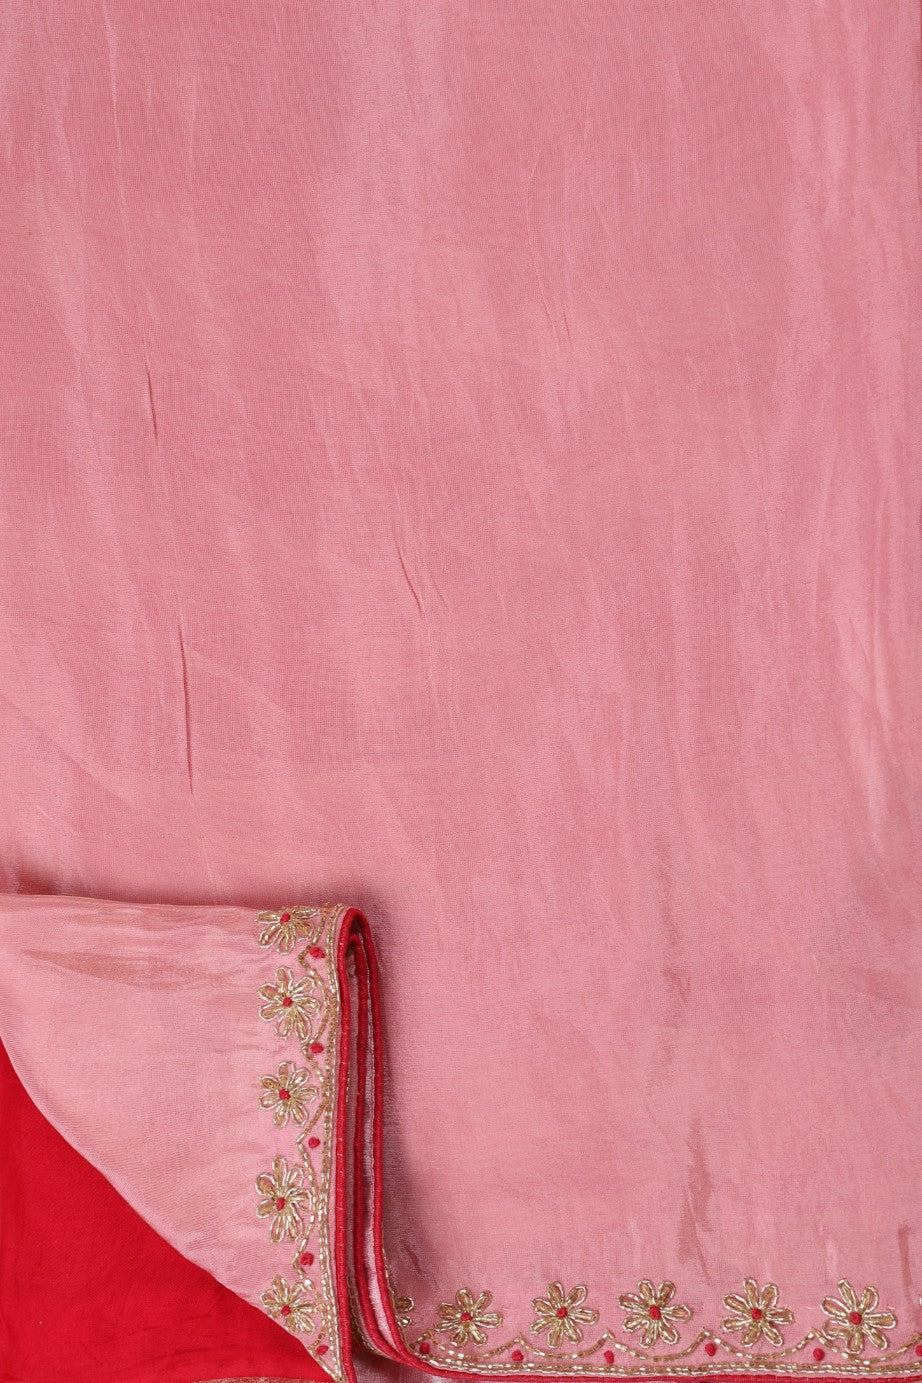 embroidery work on pink embroidered saree